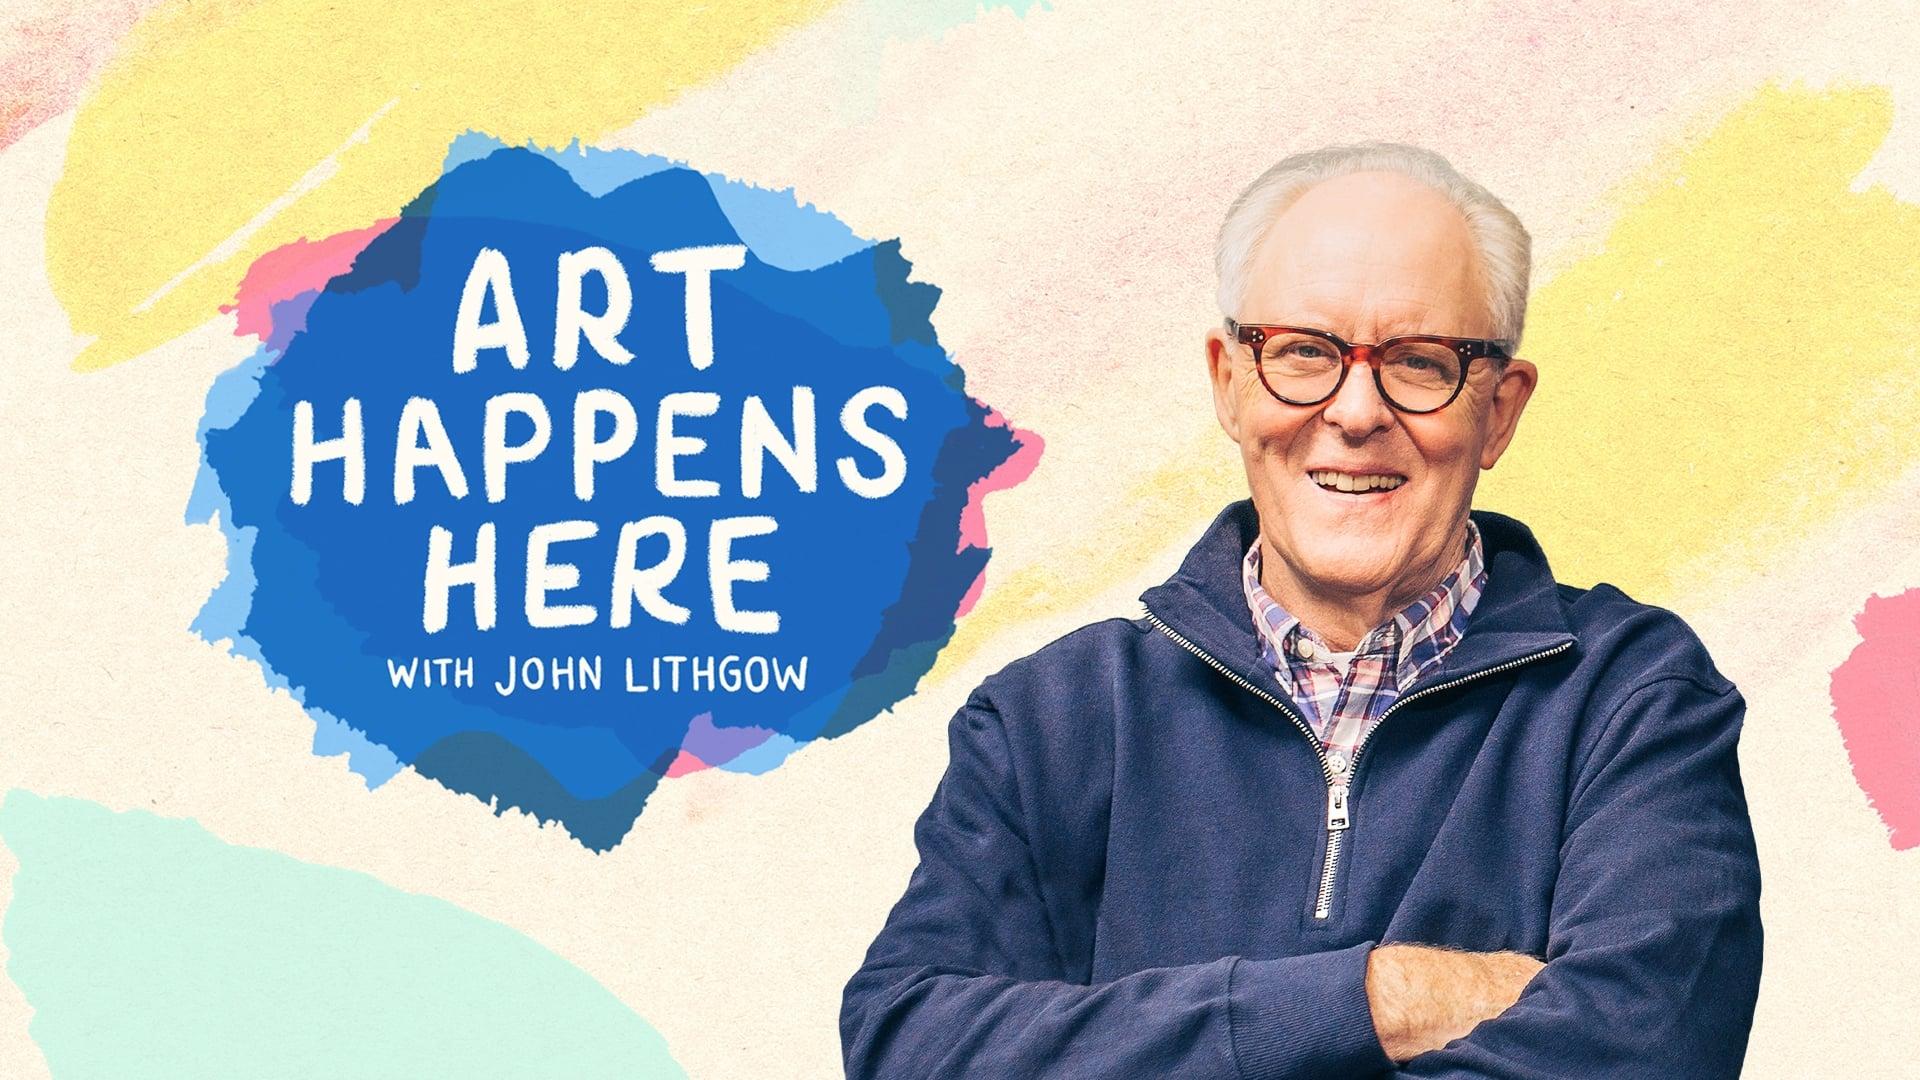 Art Happens Here with John Lithgow backdrop